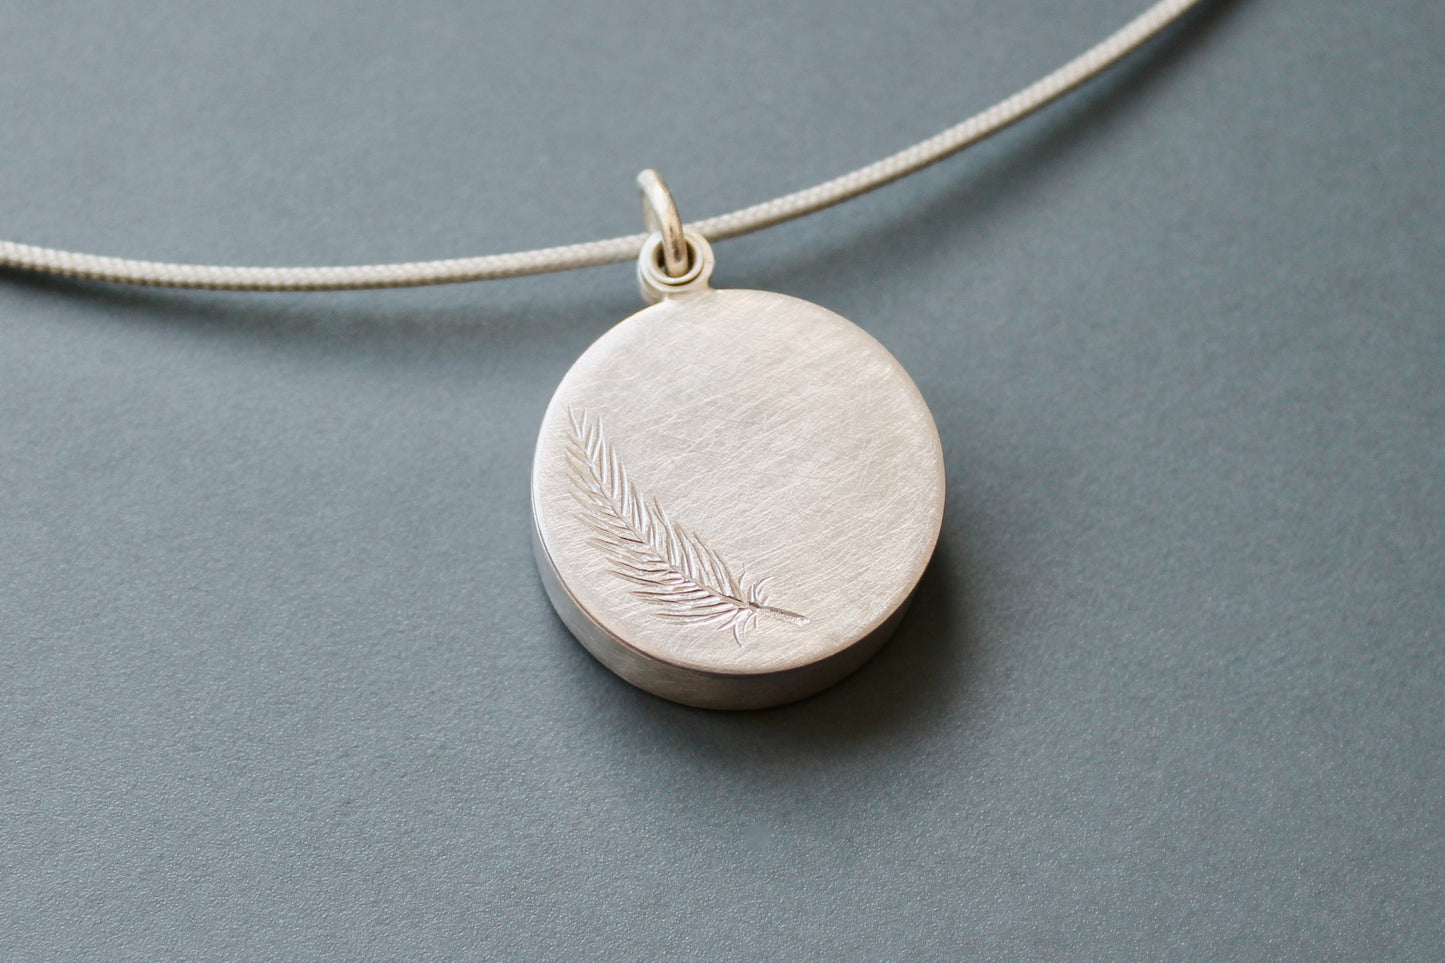 secret message locket filled with silver letter plates, a tiny feather and a golden heart